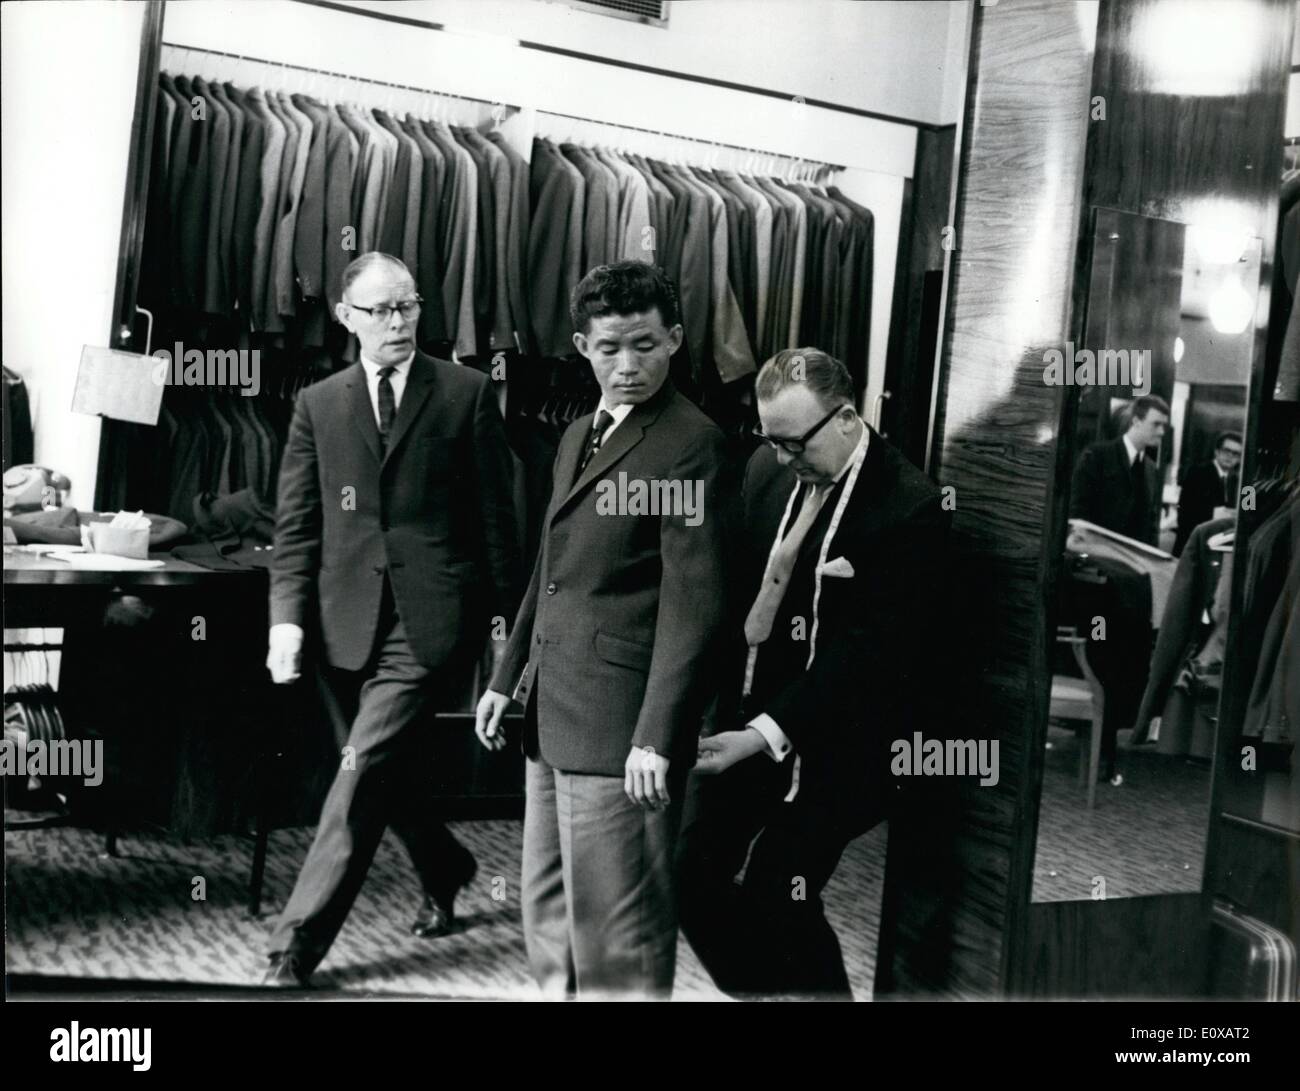 Jan. 01, 1966 - The Newest V.C. Goes to the Tailors. Rambahadur Limbu, a lance corporal in the Gurkhas who is in London to receives the V.V. from the Queen - yesterday went along to a West End branch of Burton's, where he was buying a suit - off the peg. He settled for something in charcoal twill. Of course, L/epl. Rambahadur still has to get his dress uniform - the one with the V.V. ribbon sewn into it. Lance Corporal Rambahadur Limbu of the 10th Gurkha Rifles, won his V.C. in November when he killed five Indonesian terrorists and carried two wounded men to safety Stock Photo